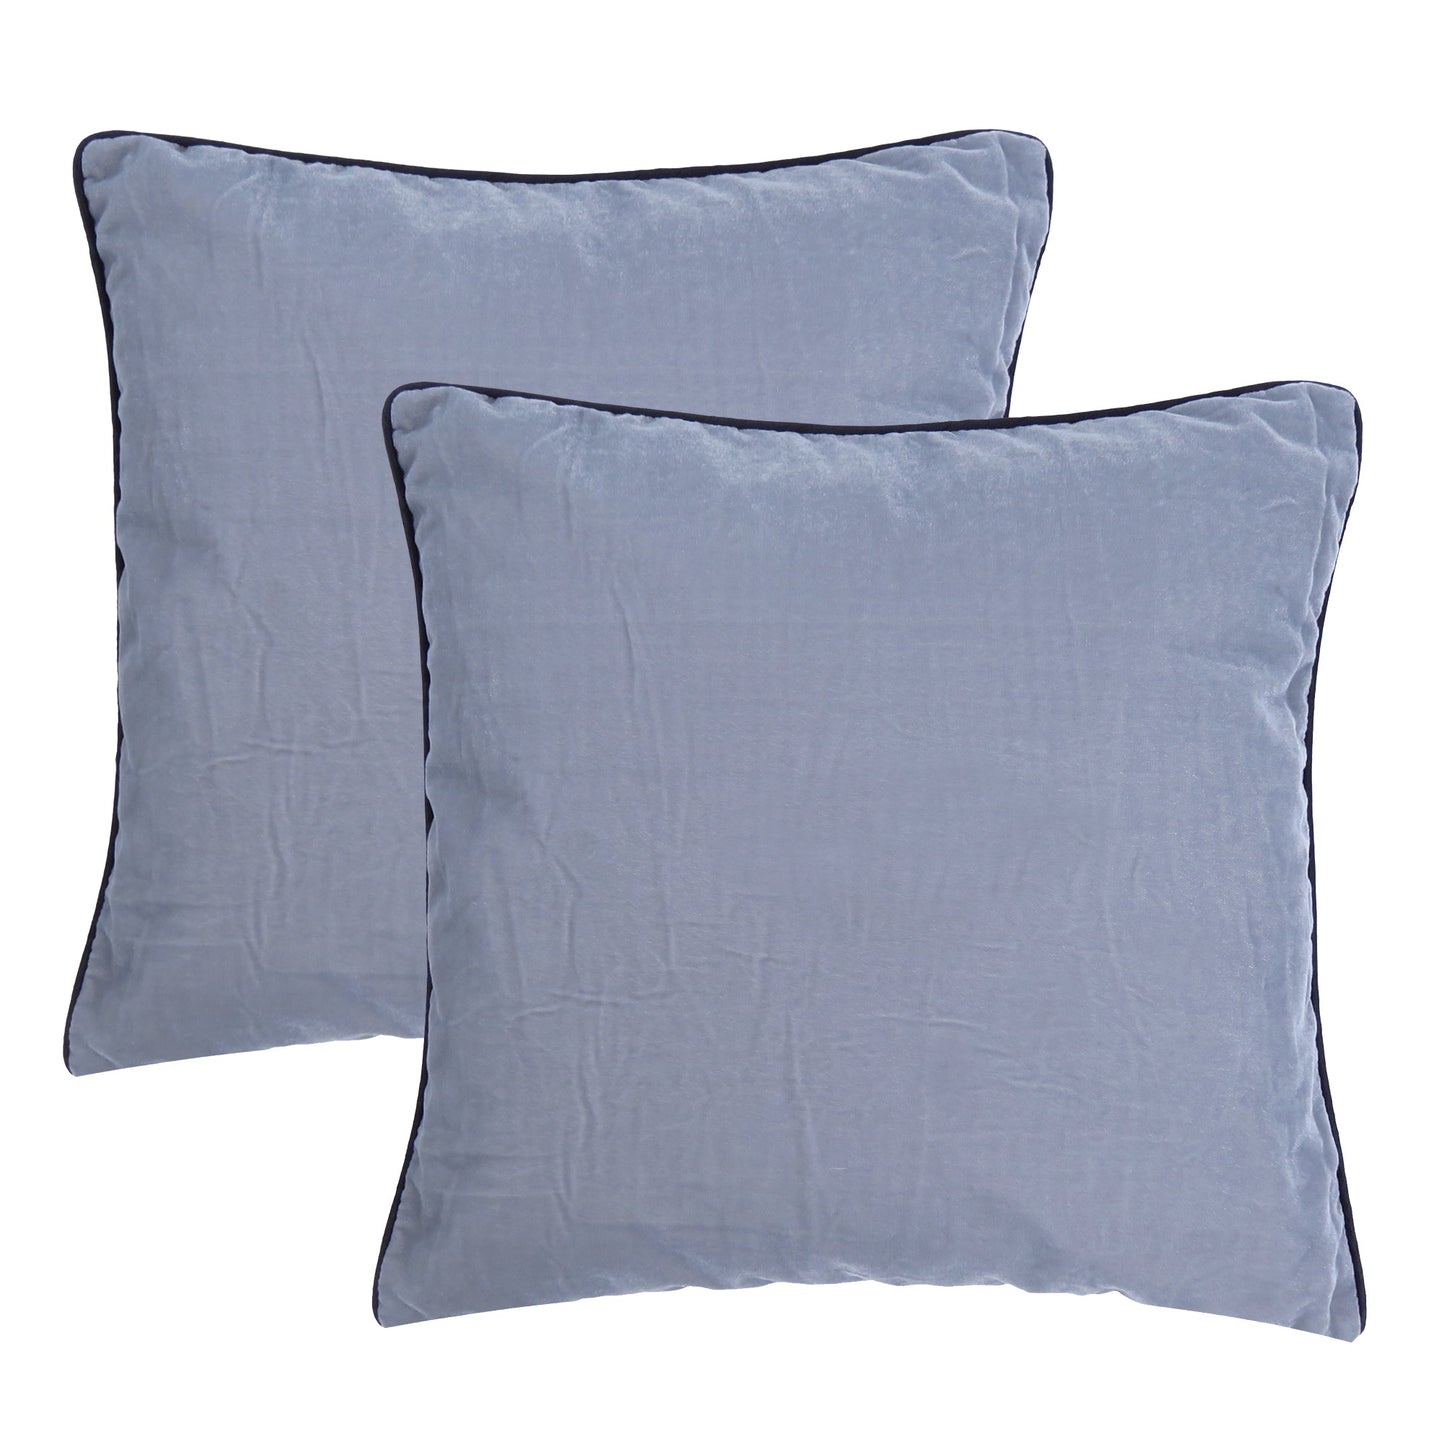 Steel Grey Velvet Cushion Cover with Black Piping Edge in Set of 2